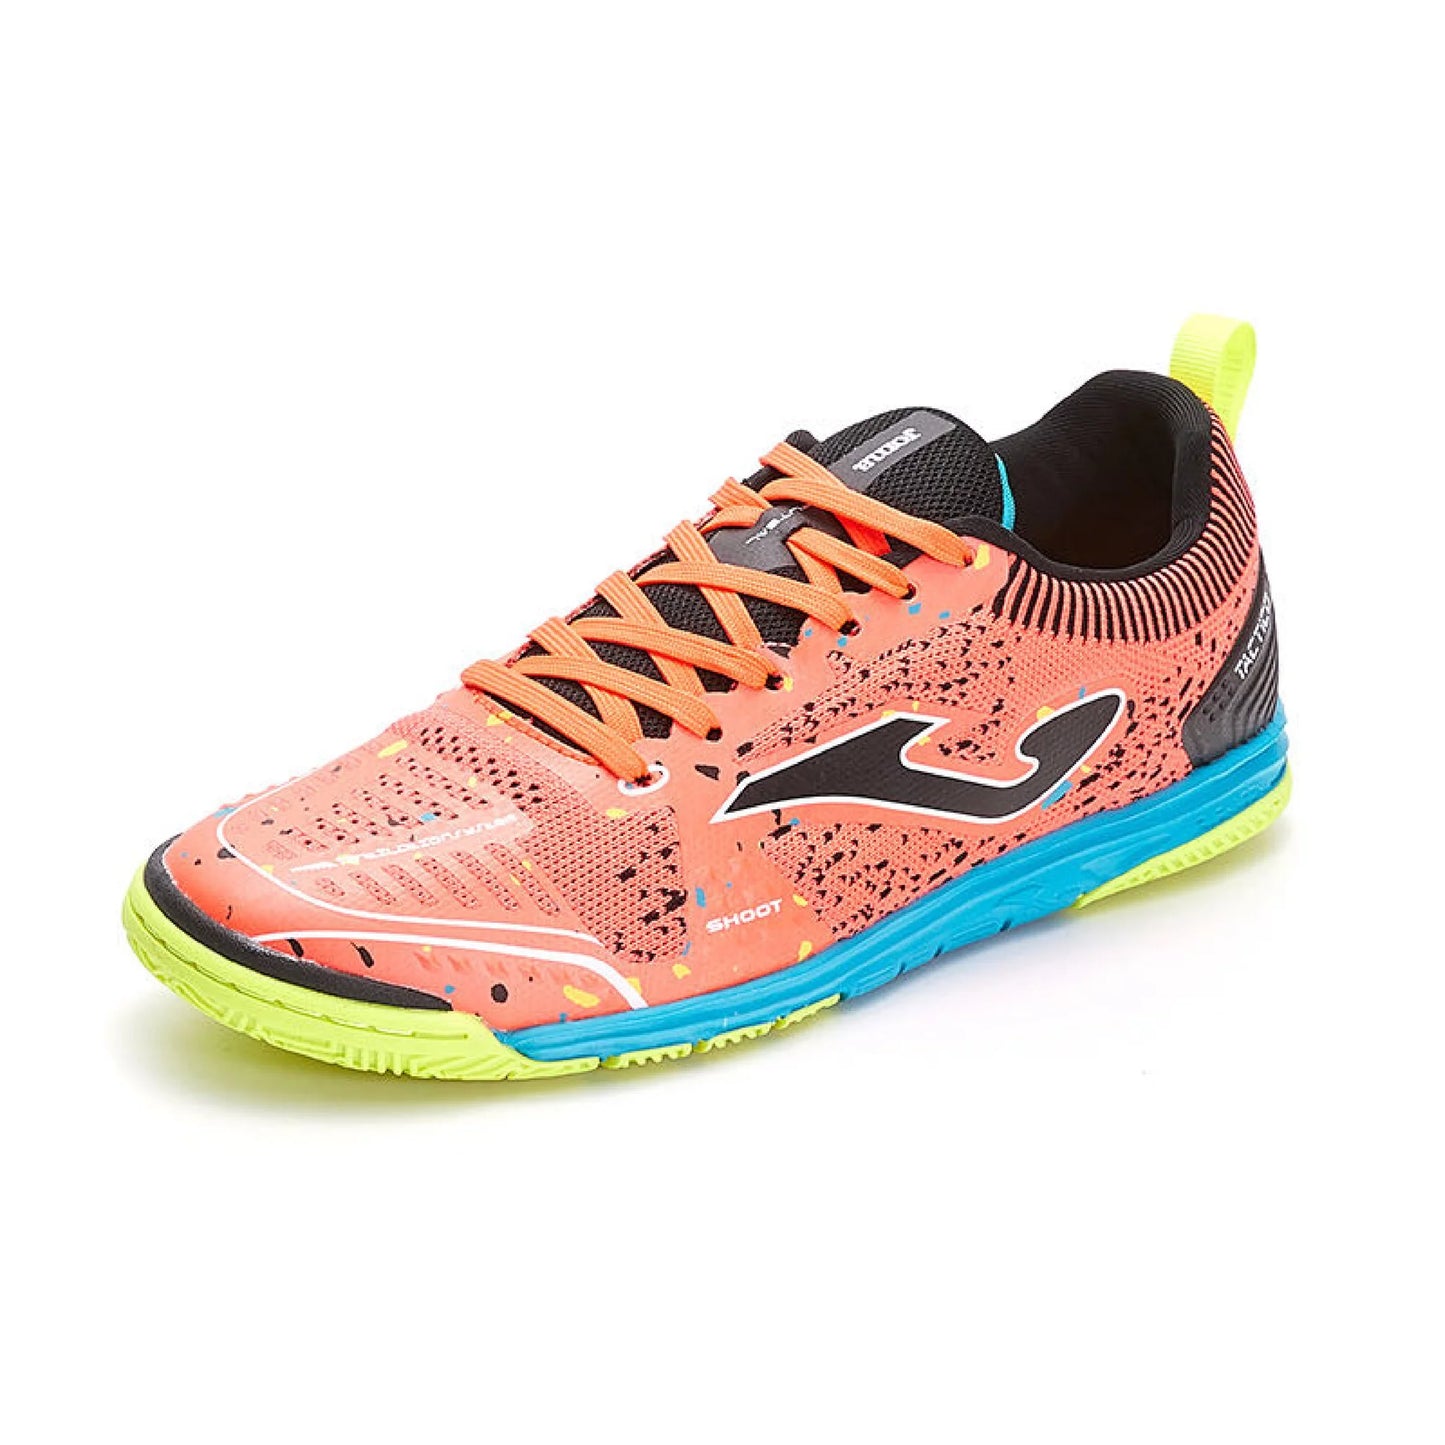 ADULT FUTSAL SHOES TACTICO - Concrete ground and Indoor【Orange Red/Black】